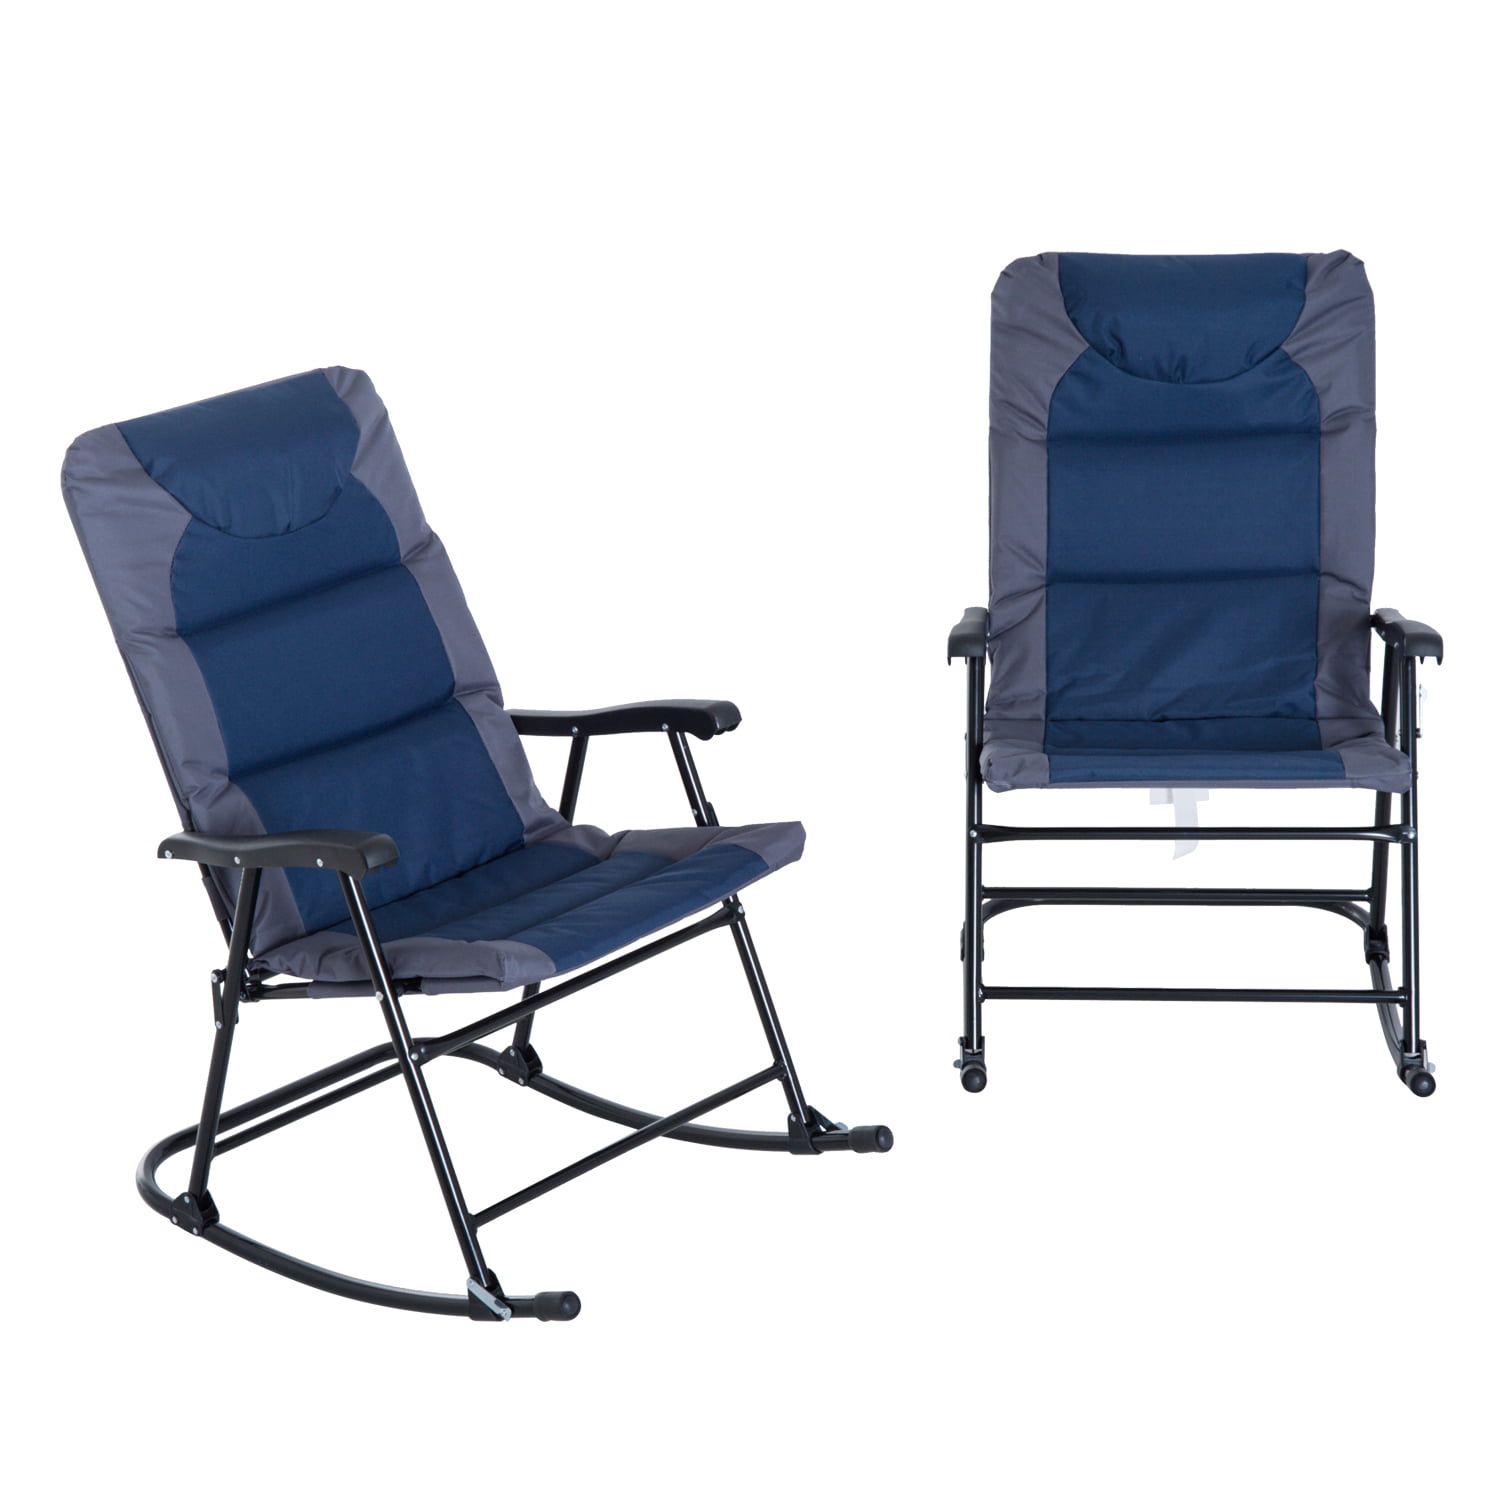 Outsunny Folding Padded Outdoor Camping Rocking Chair 2 Piece Set